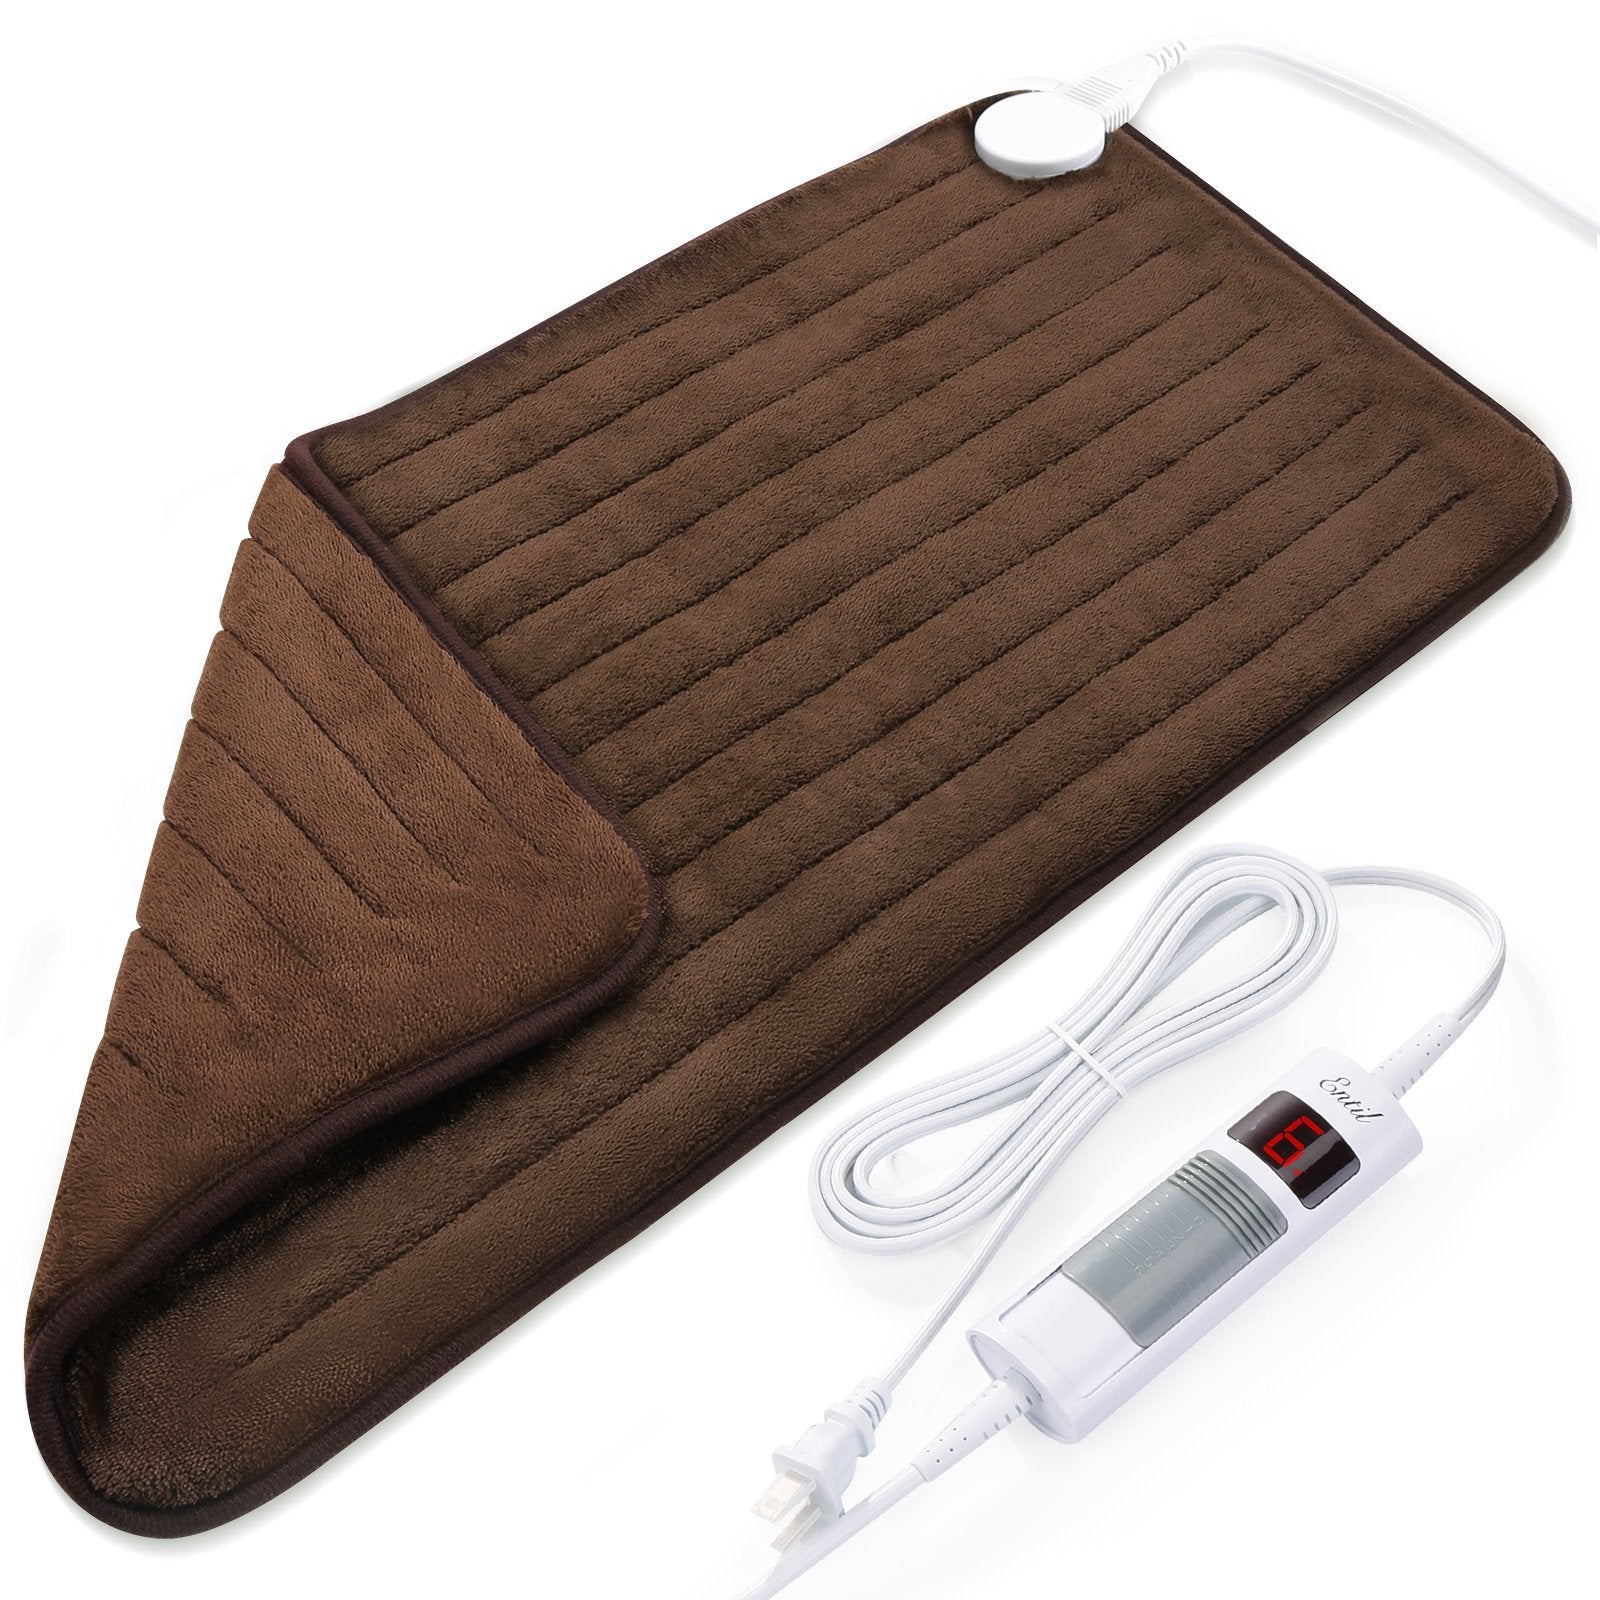 Load image into Gallery viewer, Heating Pad for Full Body Pain Relief, Super Soft and Extra Large, Safe 1.5 Hours Auto Shut Off, 6 Levels Heating Settings, 12 x 24 Inch, Full Body Use, Chestnut - NAIPO
